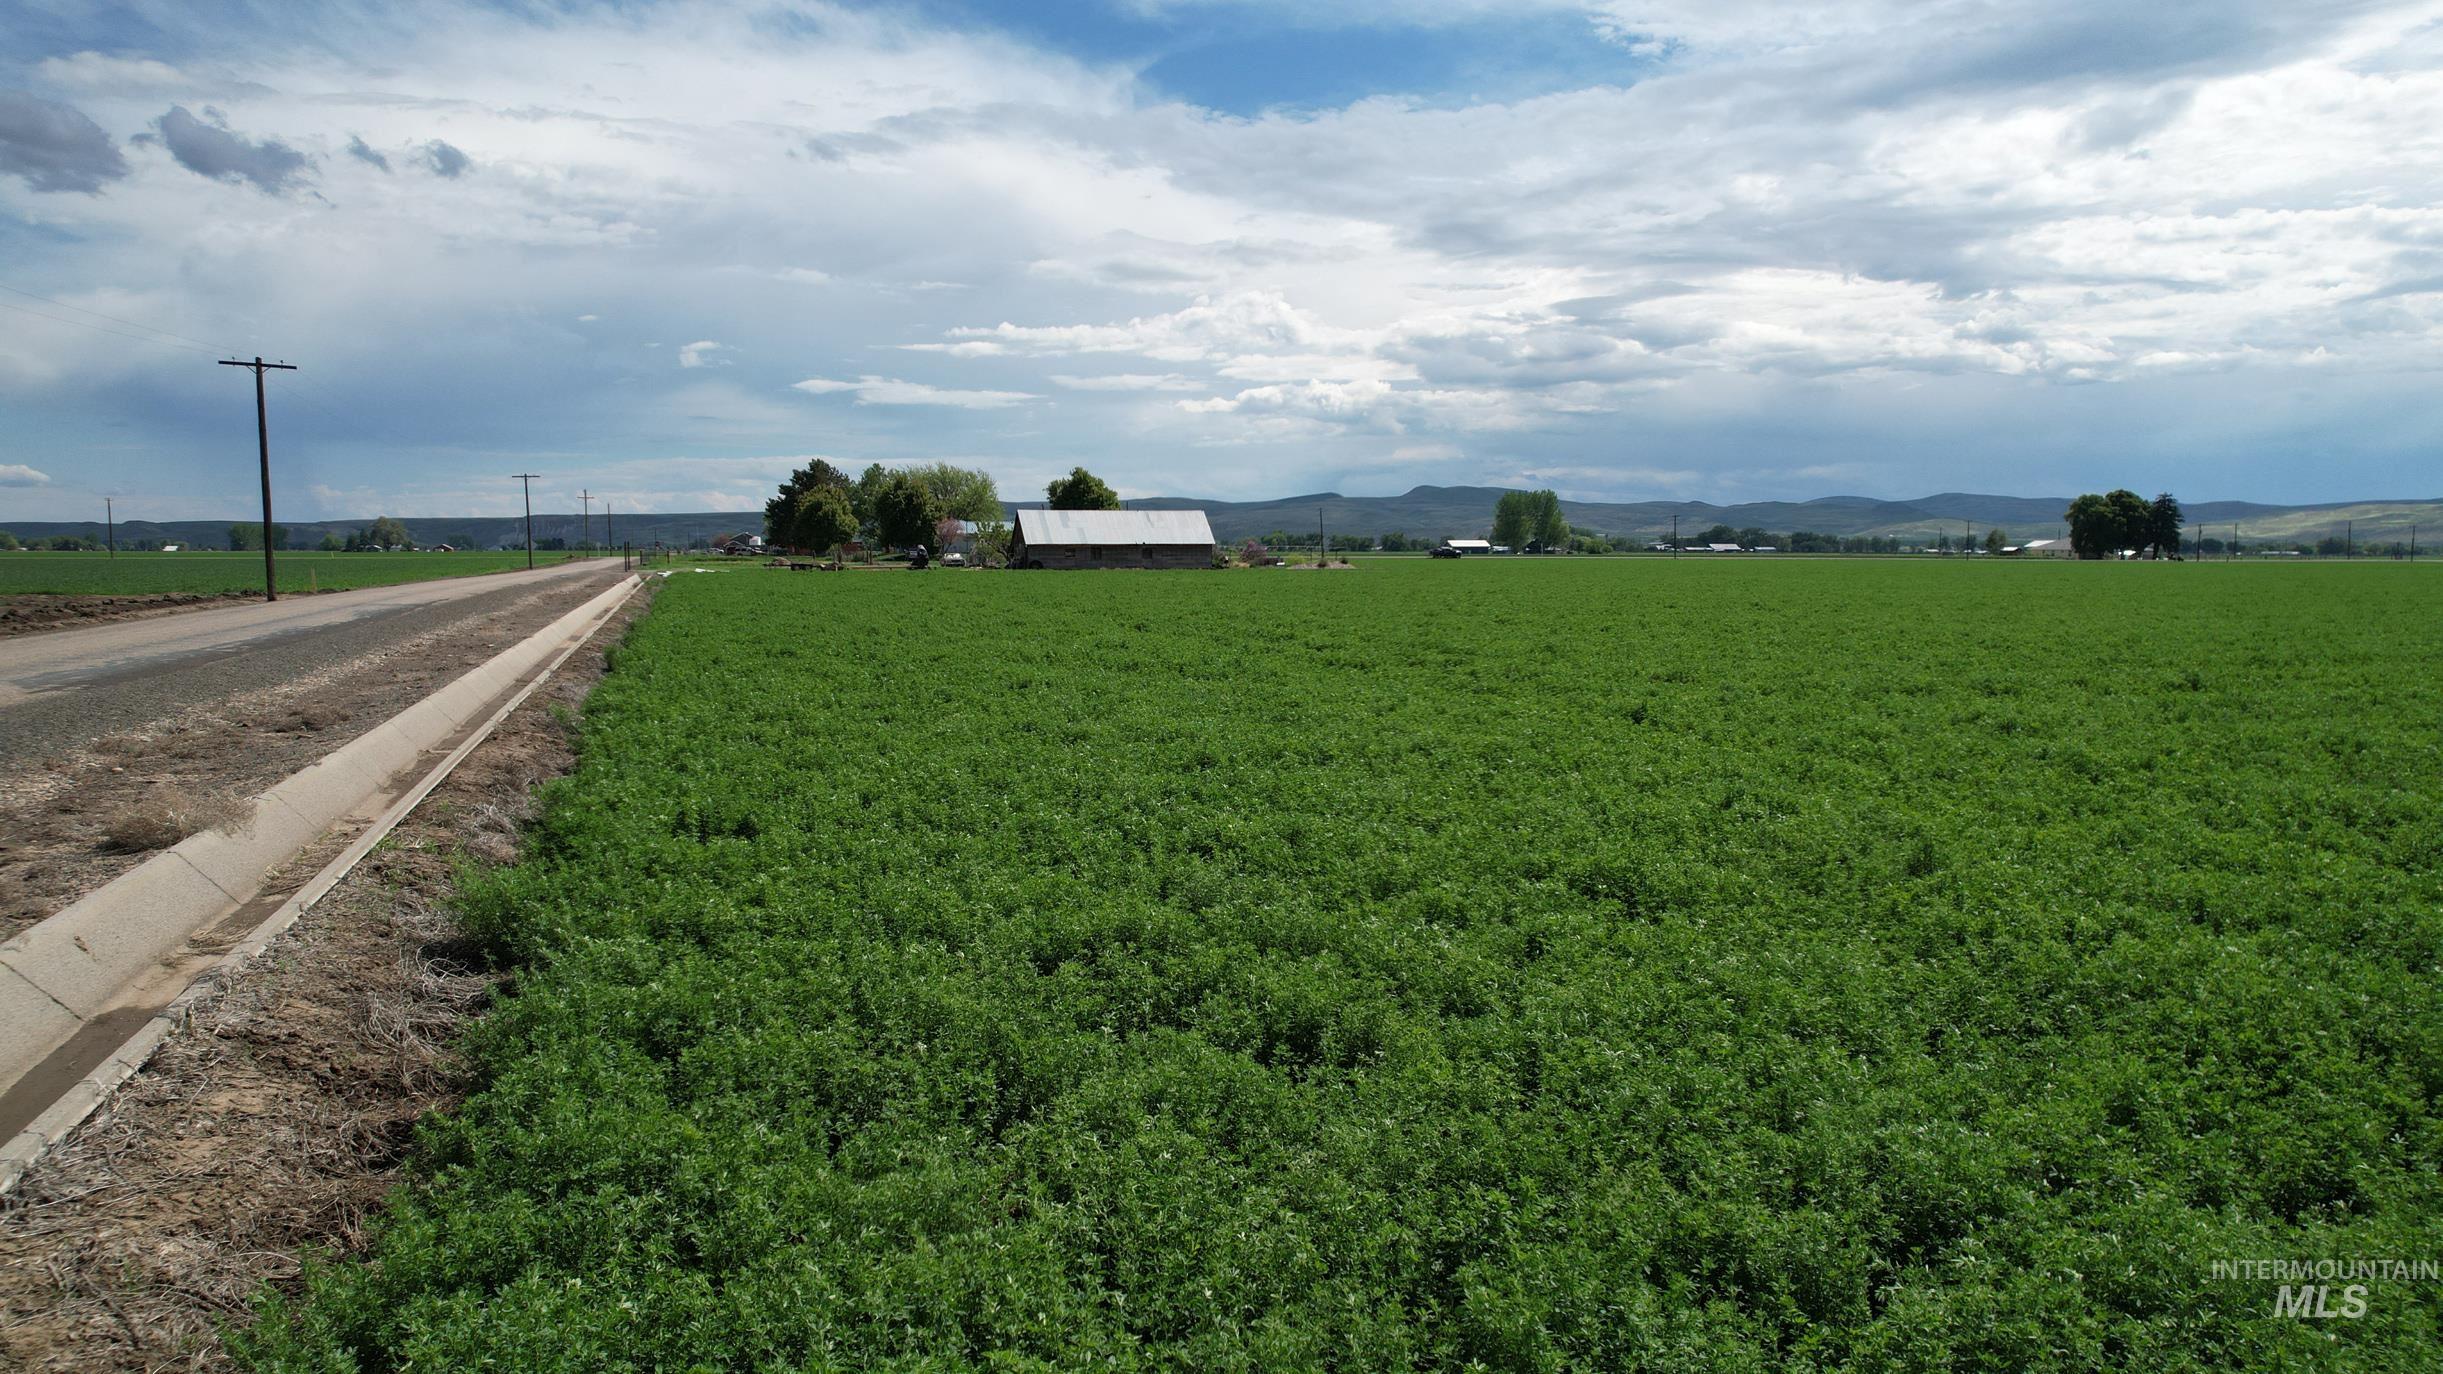 0 Olds Ferry Road, Weiser, Idaho 83672, Farm & Ranch For Sale, Price $691,410,MLS 98882054